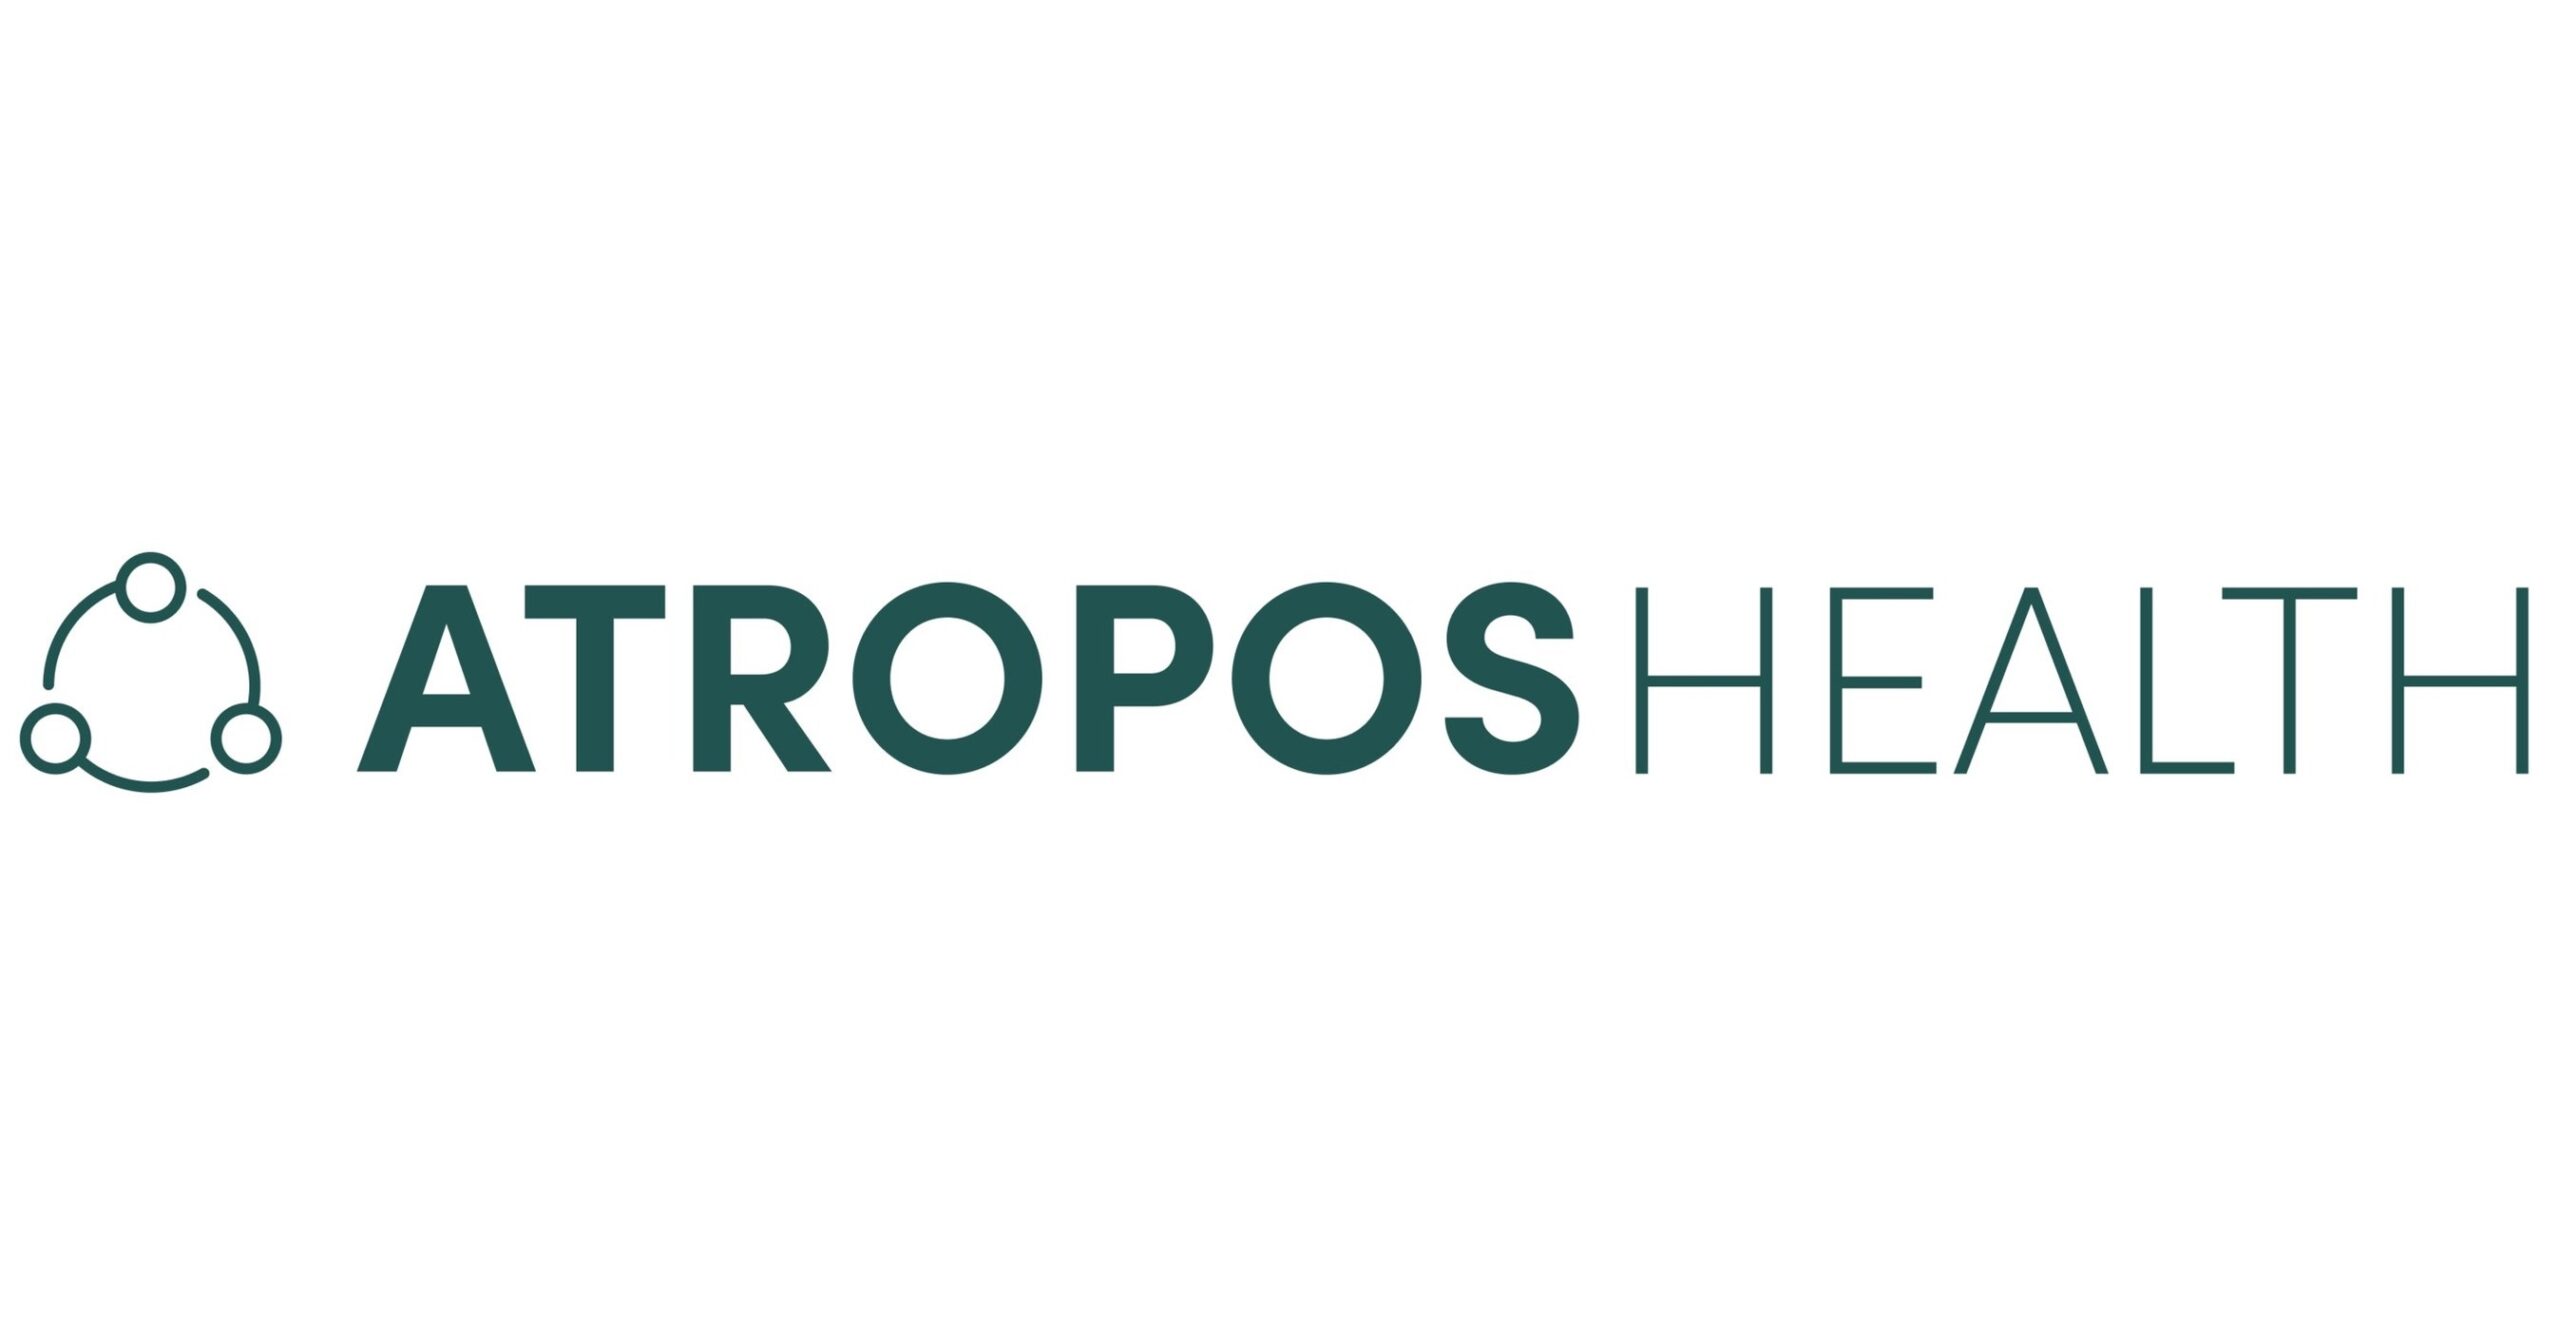 Atropos Health Goes Global With New Funding from Samsung, Presido Ventures